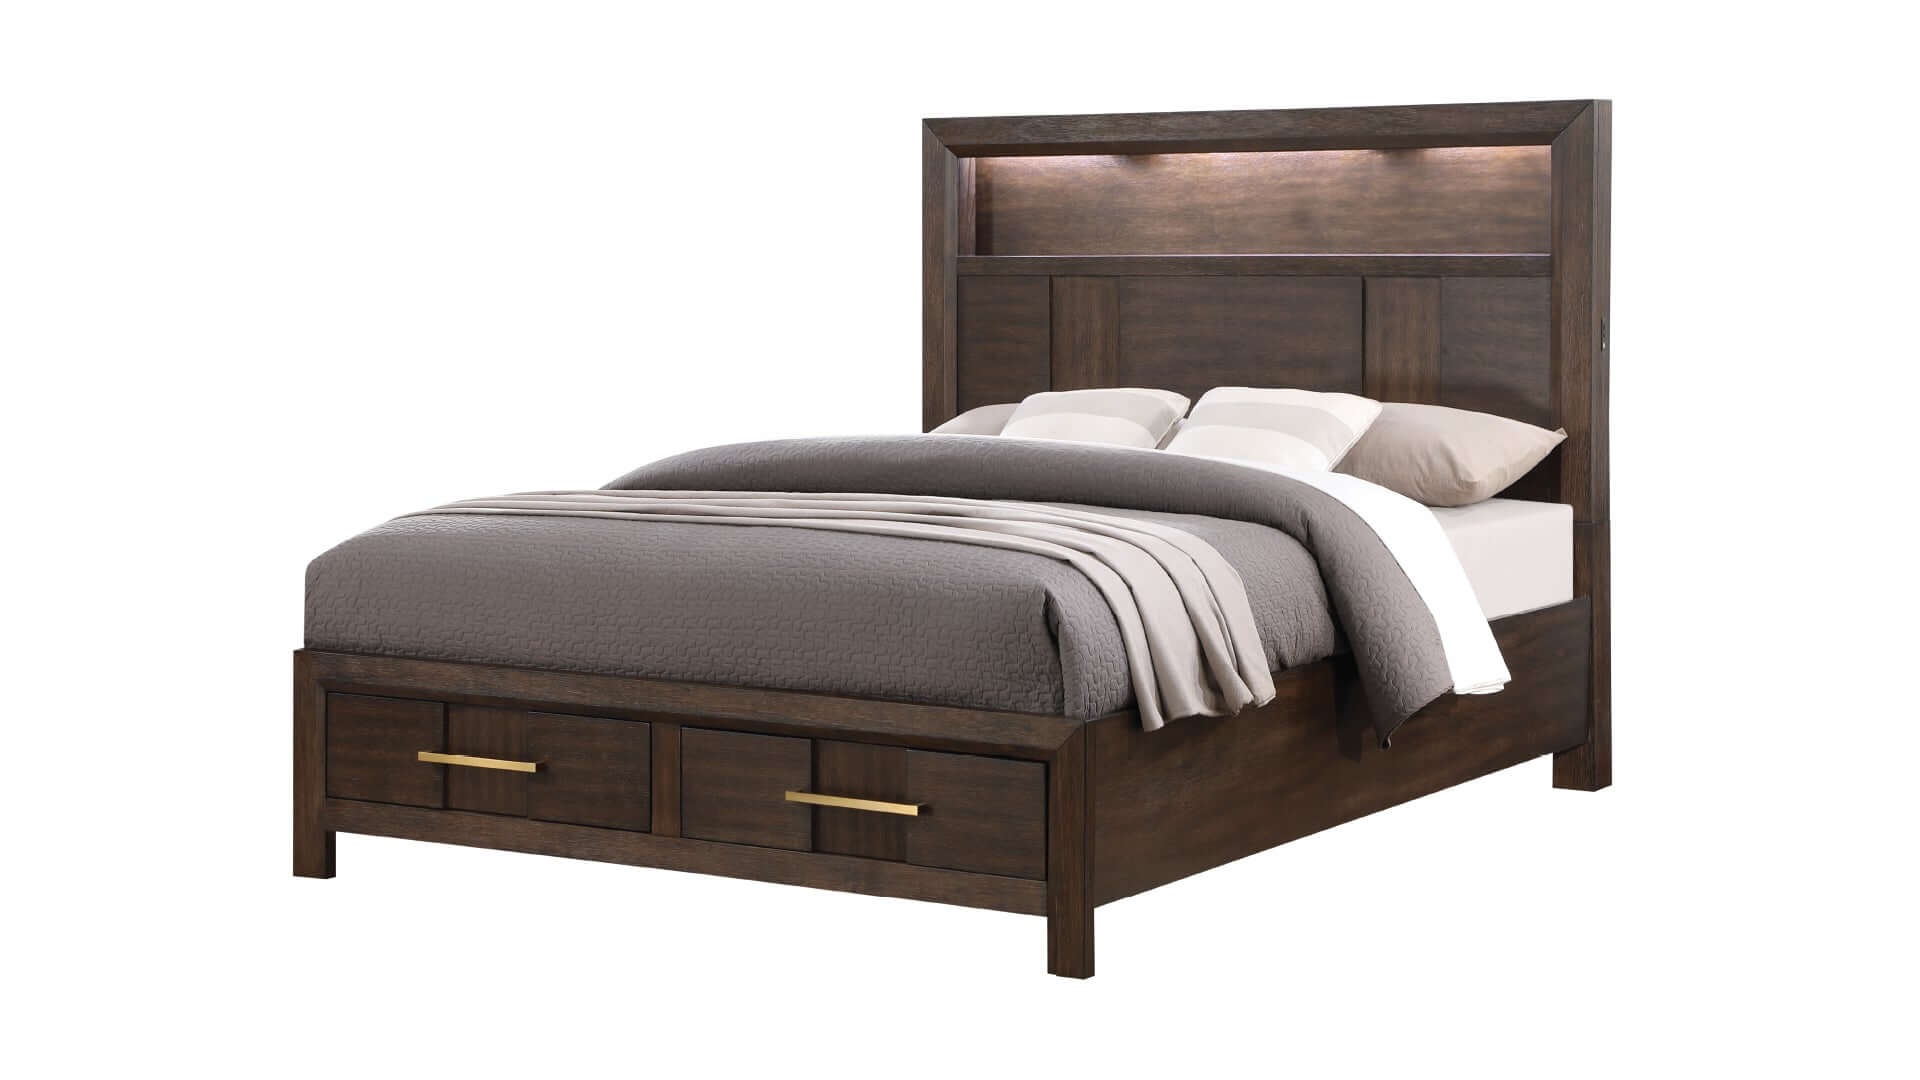 Modern Style King 5PC Storage Bedroom Set Made with Wood, LED Headboard, Bluetooth Speakers & USB Ports